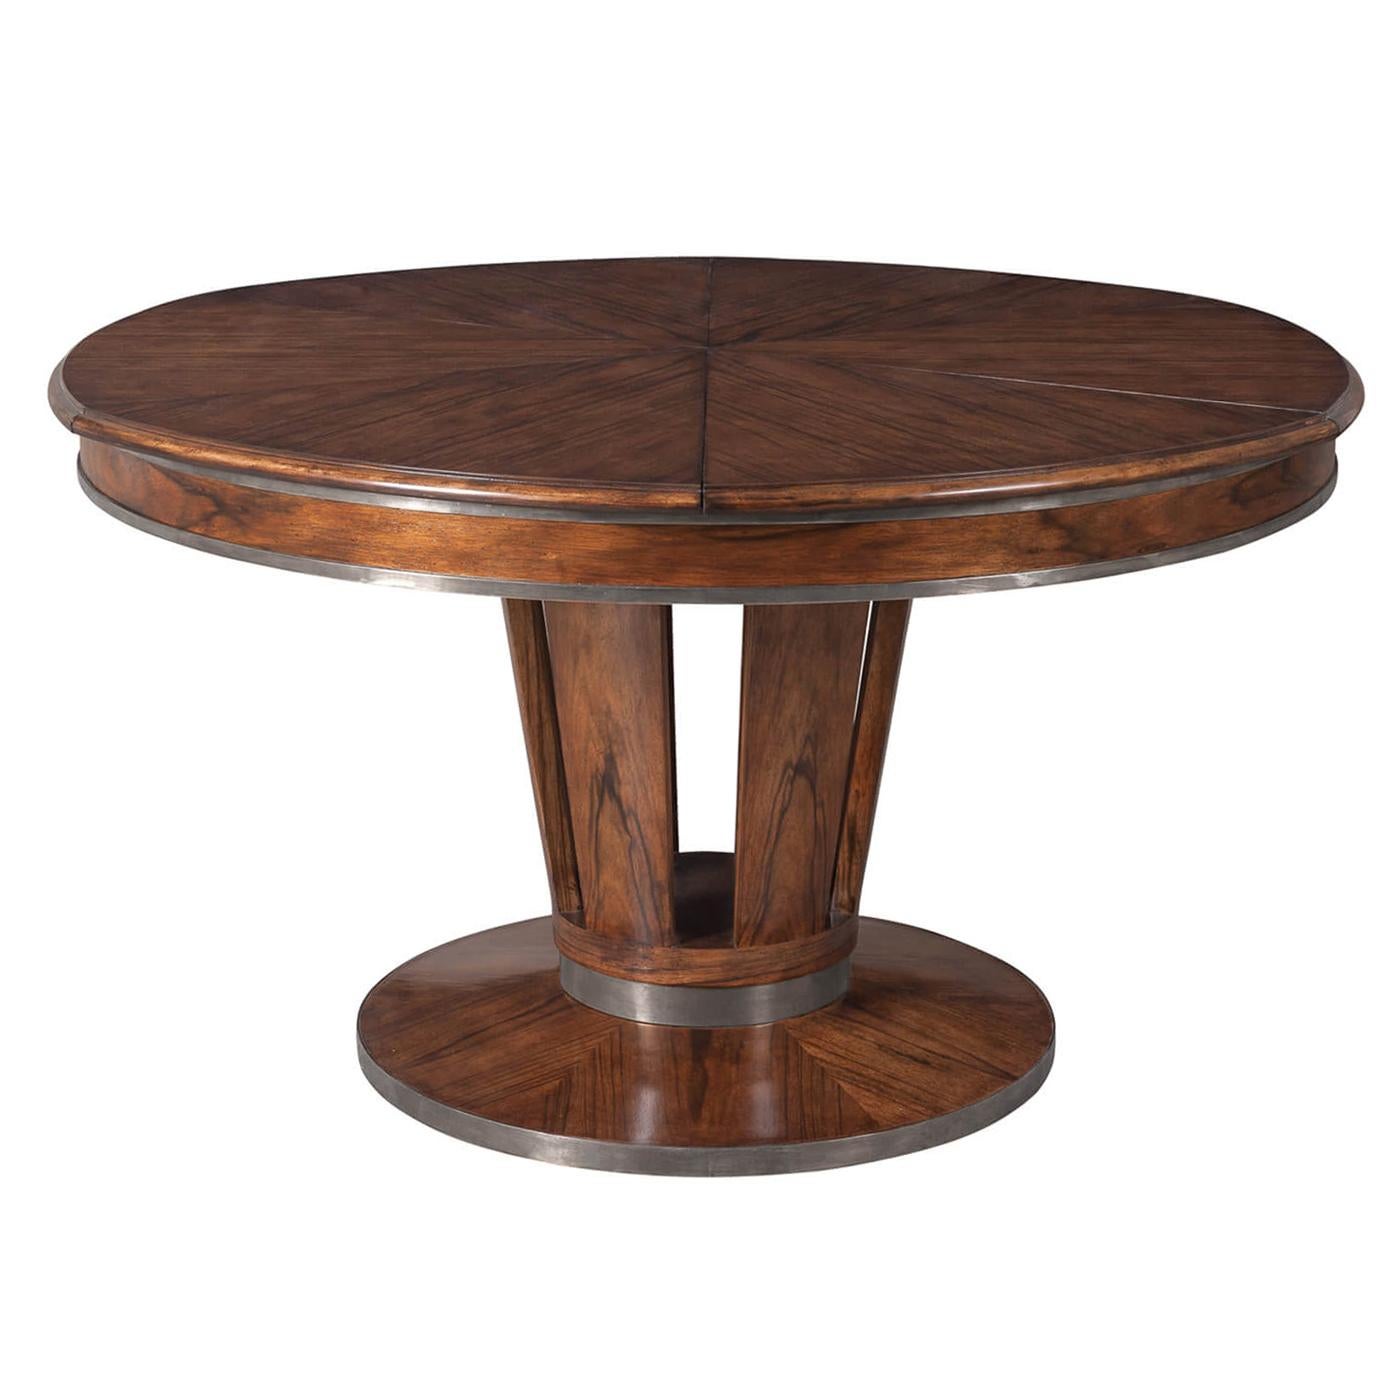 Art Deco style extension table crafted of solid walnut and a Paldeo veneered top. The pedestal features six convex members resting on a circular base enhanced by antique stainless steel bands.

Dimensions: 70